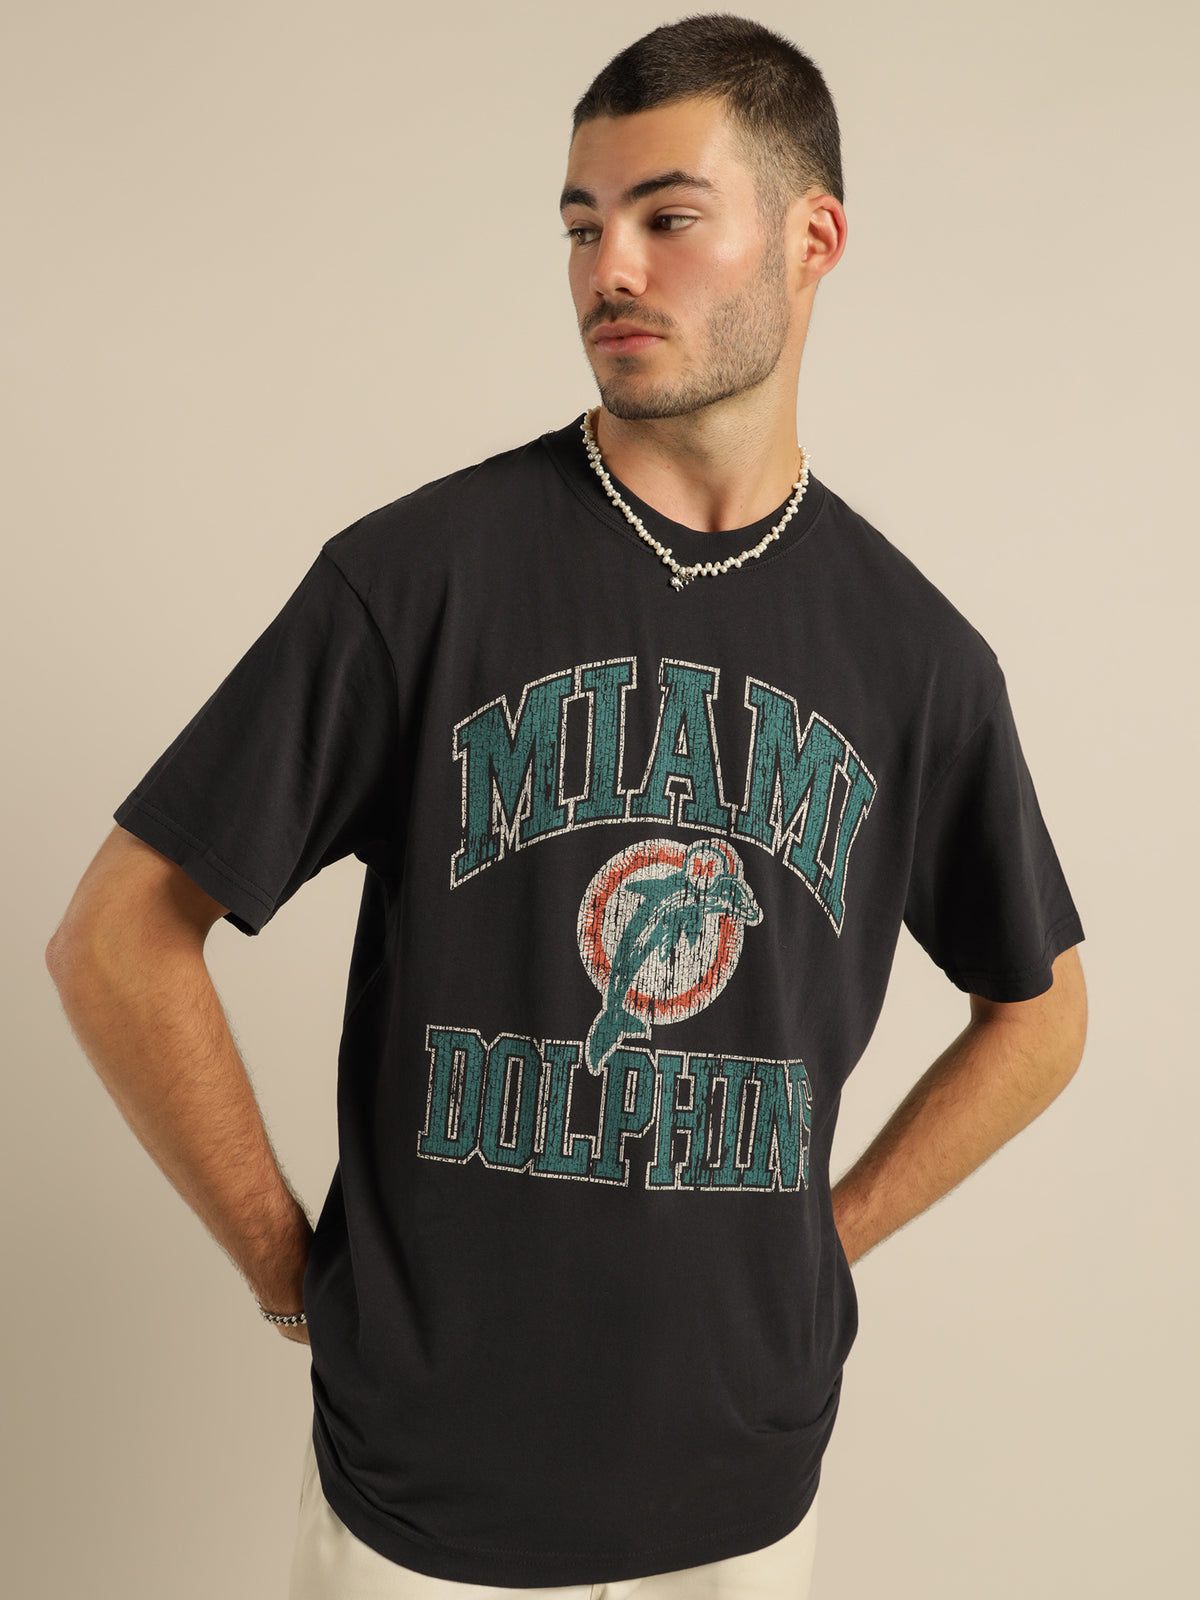 Miami Dolphins T-Shirt in Black